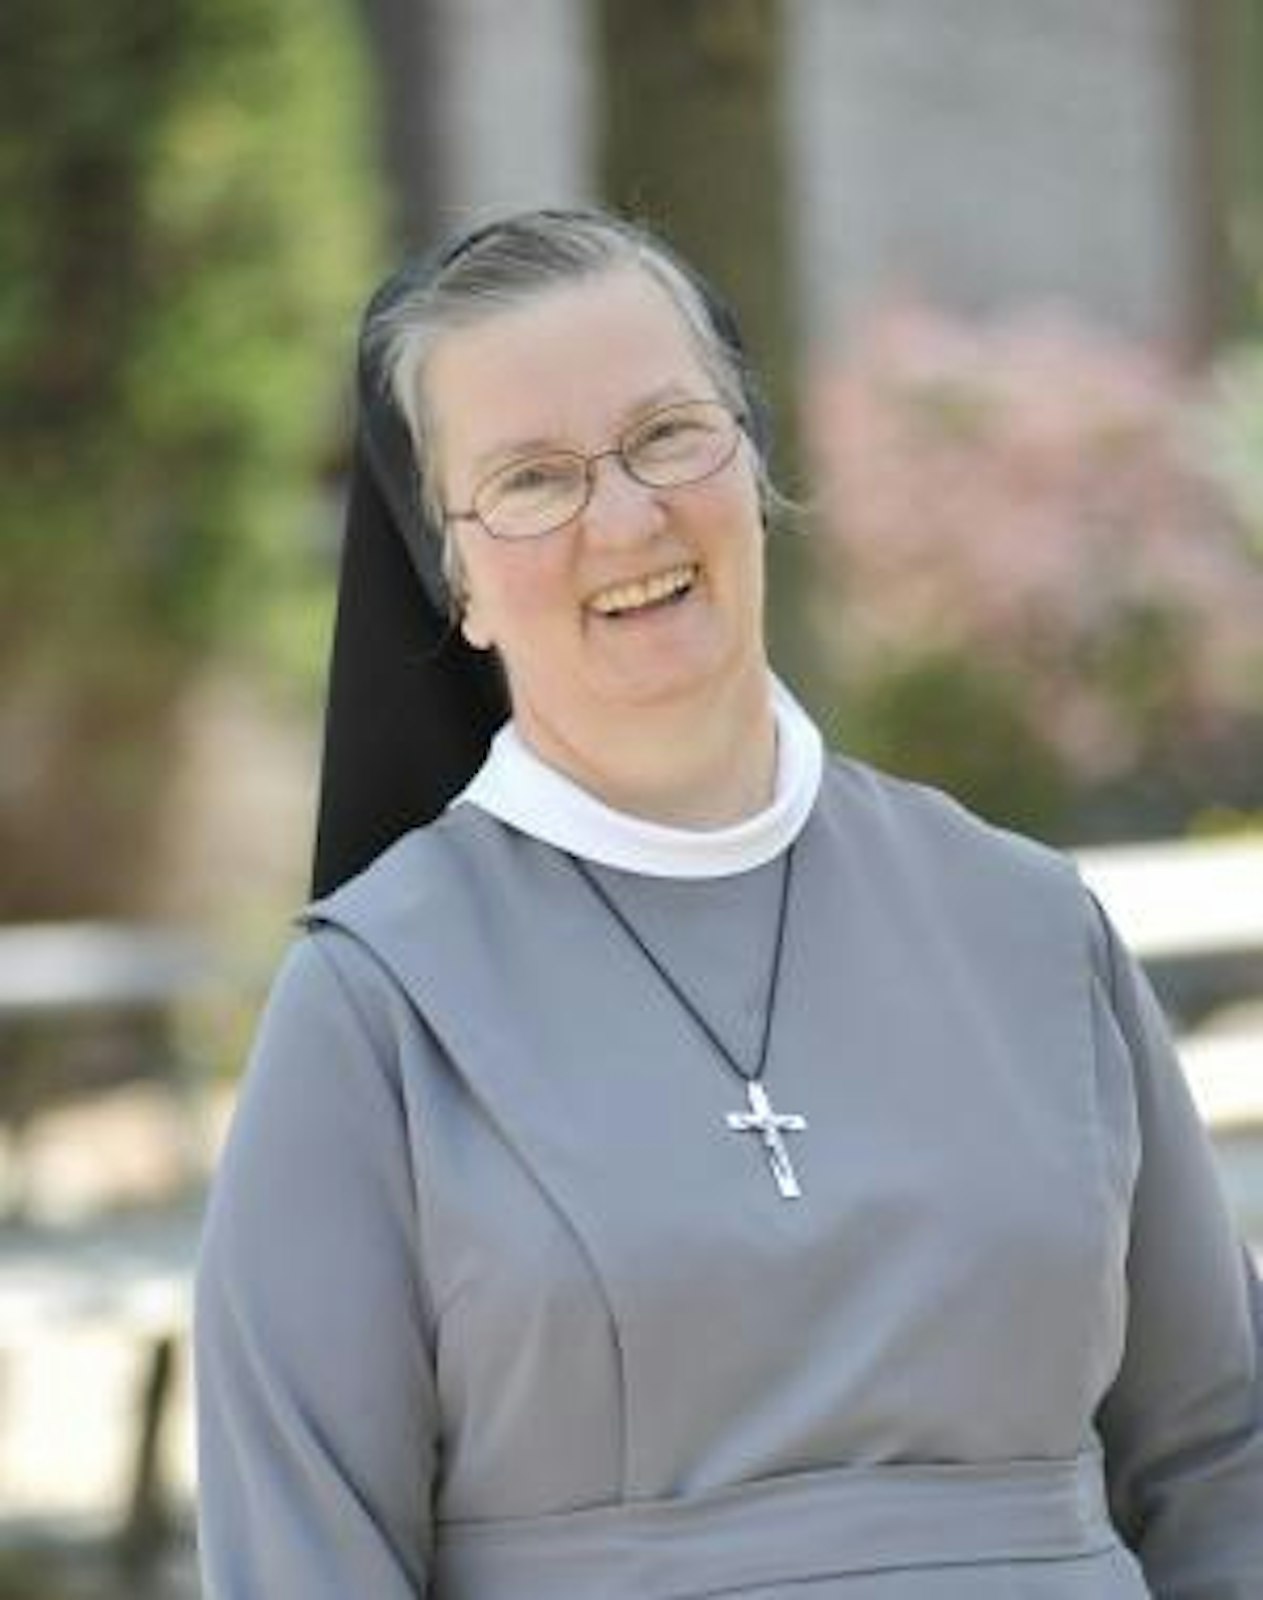 Sr. M. Johanna Paruch, FSGM, Ph.D., a professor of theology at the Franciscan University of Steubenville, was a keynote speaker at the conference. (Courtesy of the Franciscan University of Steubenville)